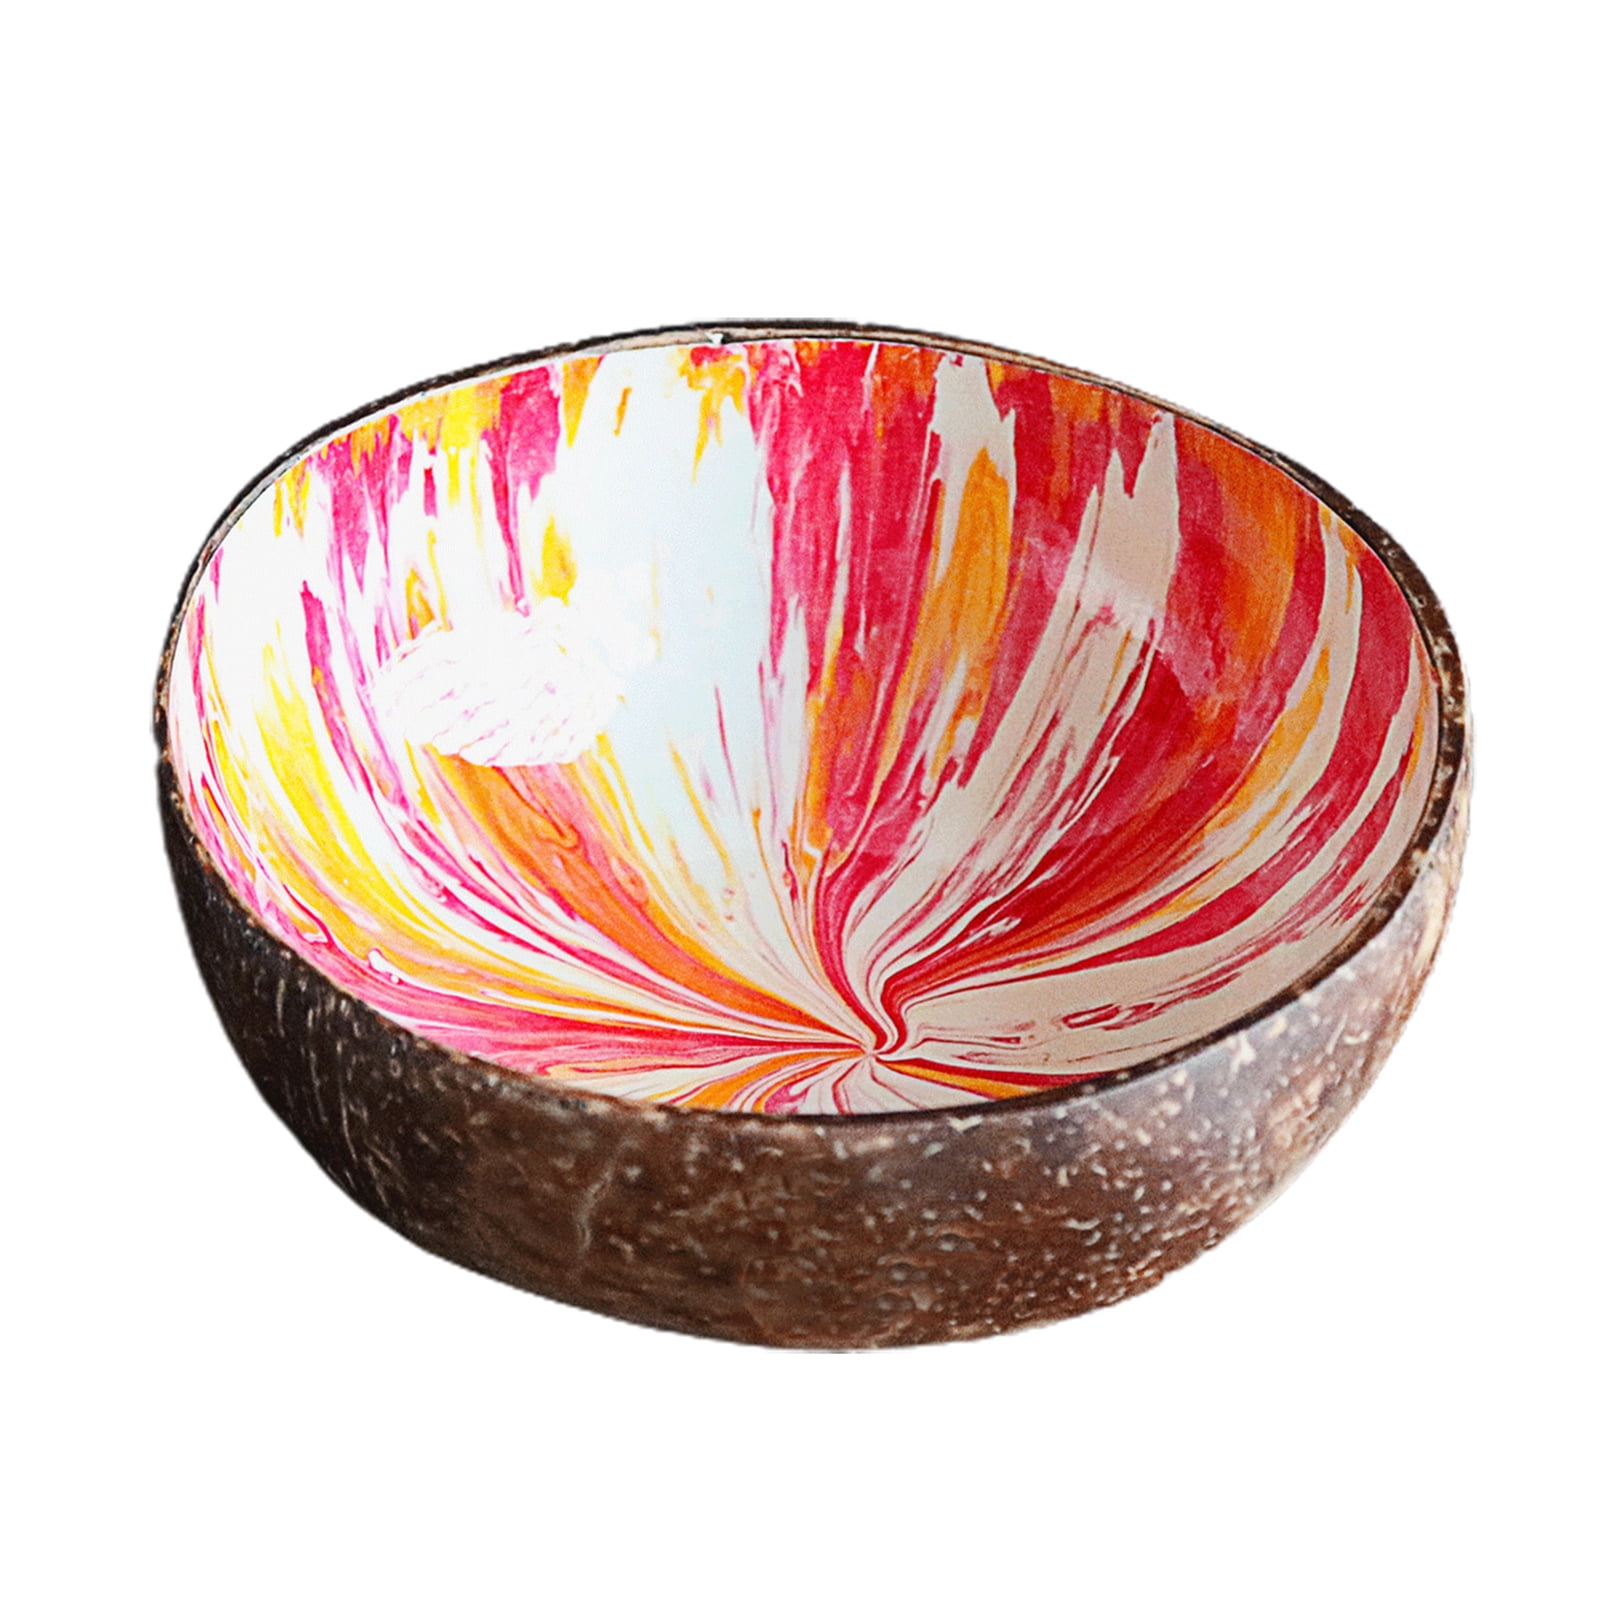 Natural 100% Handmade Coconut Shell Bowl for dessert fruits and seeds 